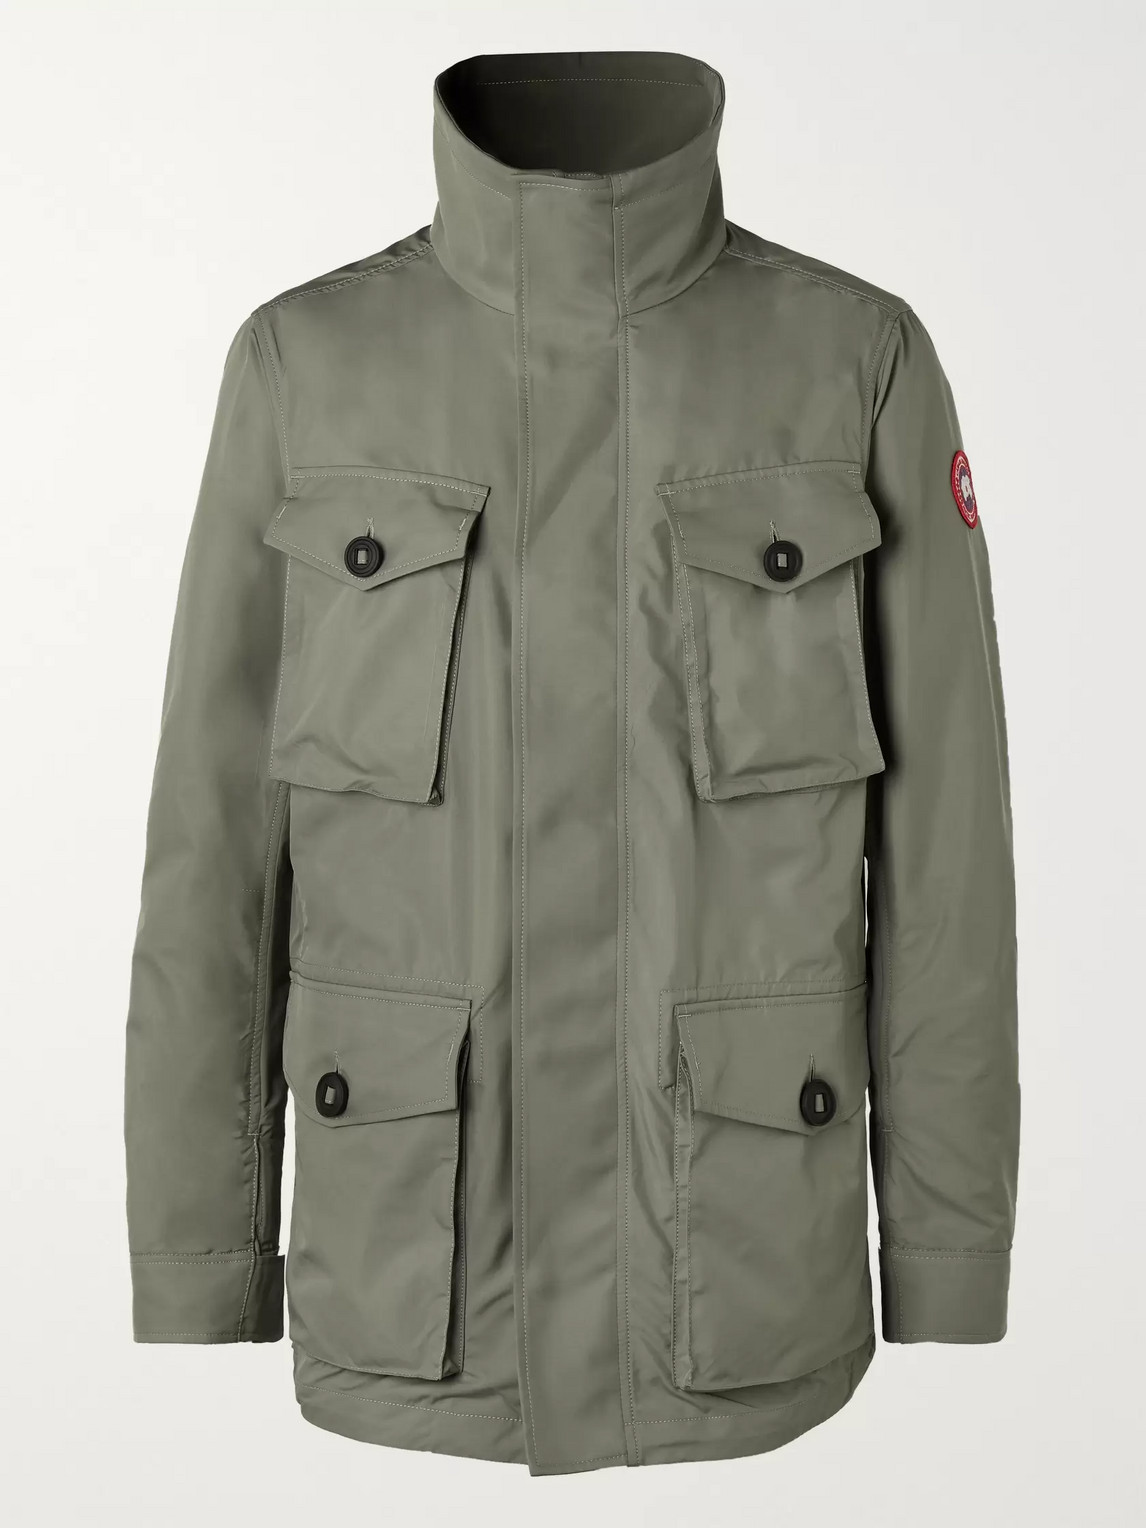 CANADA GOOSE STANHOPE DURA-FORCE LIGHT FIELD JACKET